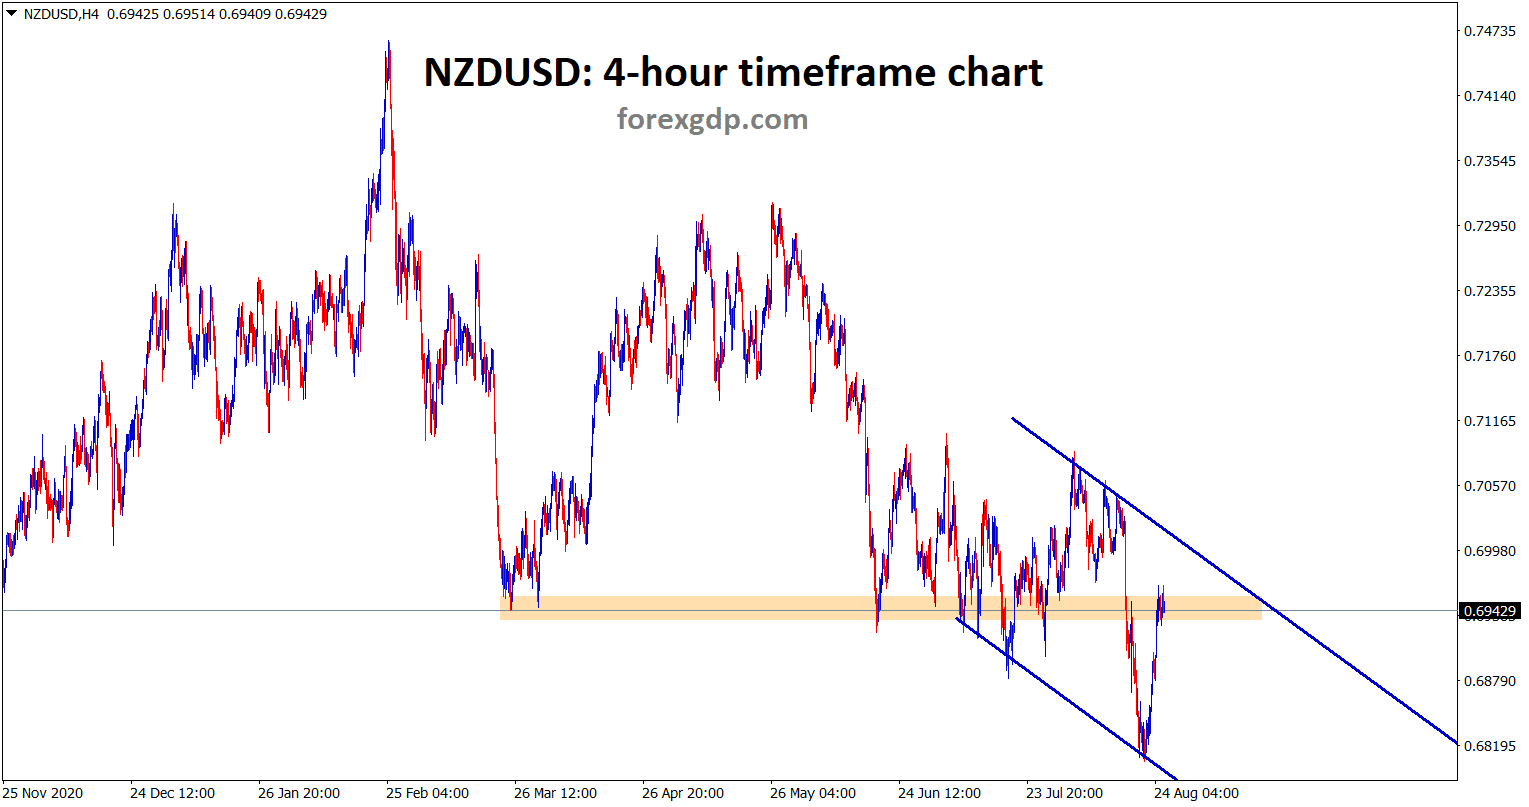 NZDUSD is also retesting the previous support wait for the confirmation of up or downward movement